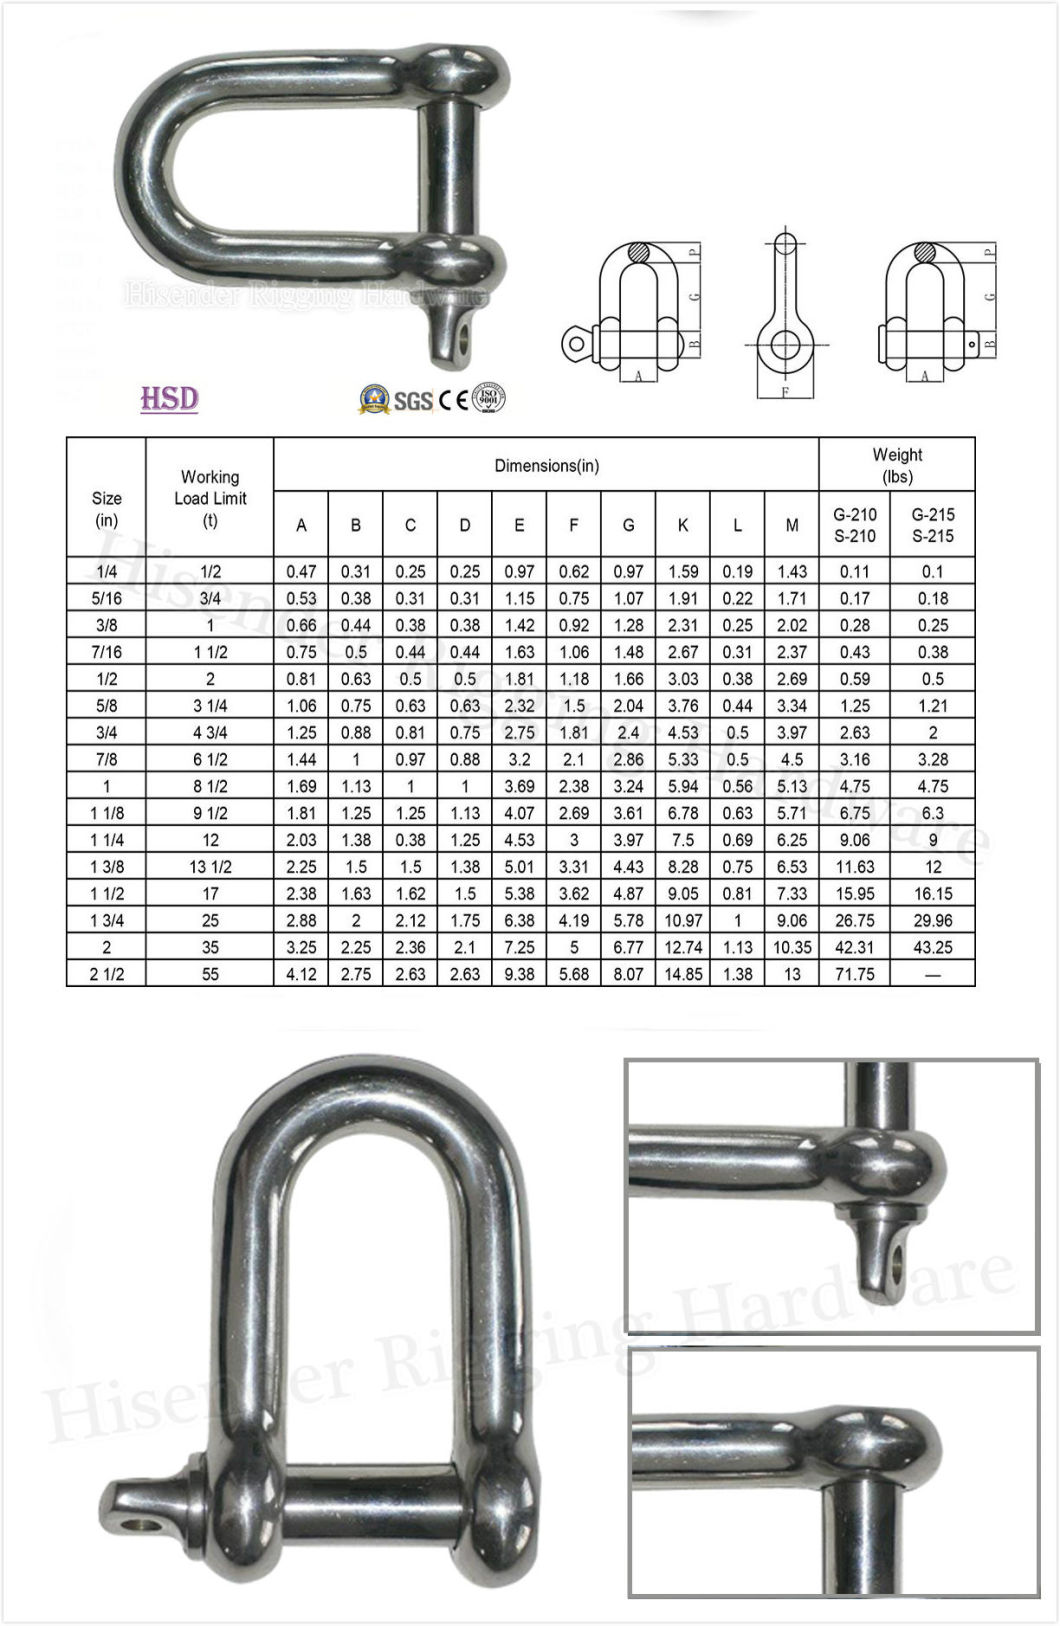 Stainless Steel304/316 U. S. Type G210 Dee Shackle for Marine Rigging